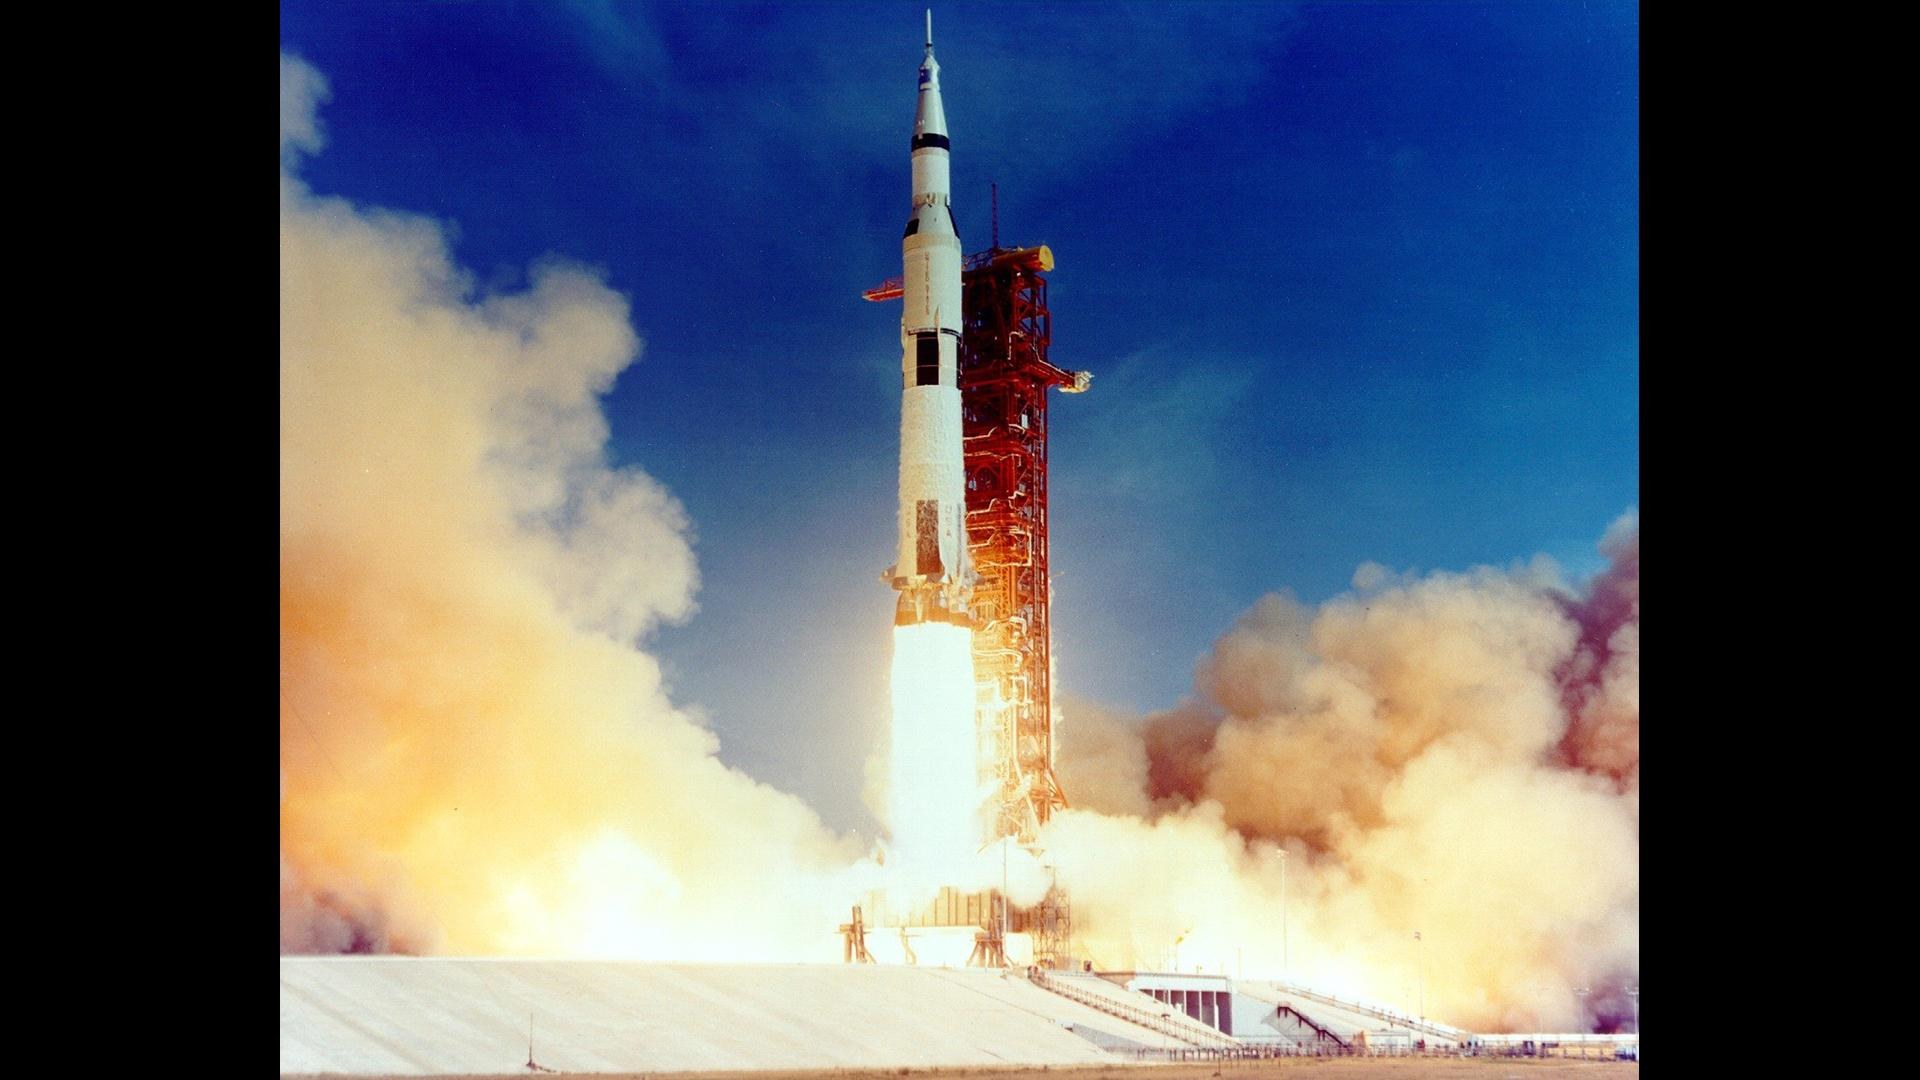 Launch of the Saturn V rocket carrying the Apollo 11 mission lifted off from Launch Complex 39A at Kennedy Space Center on the east coast of Florida.